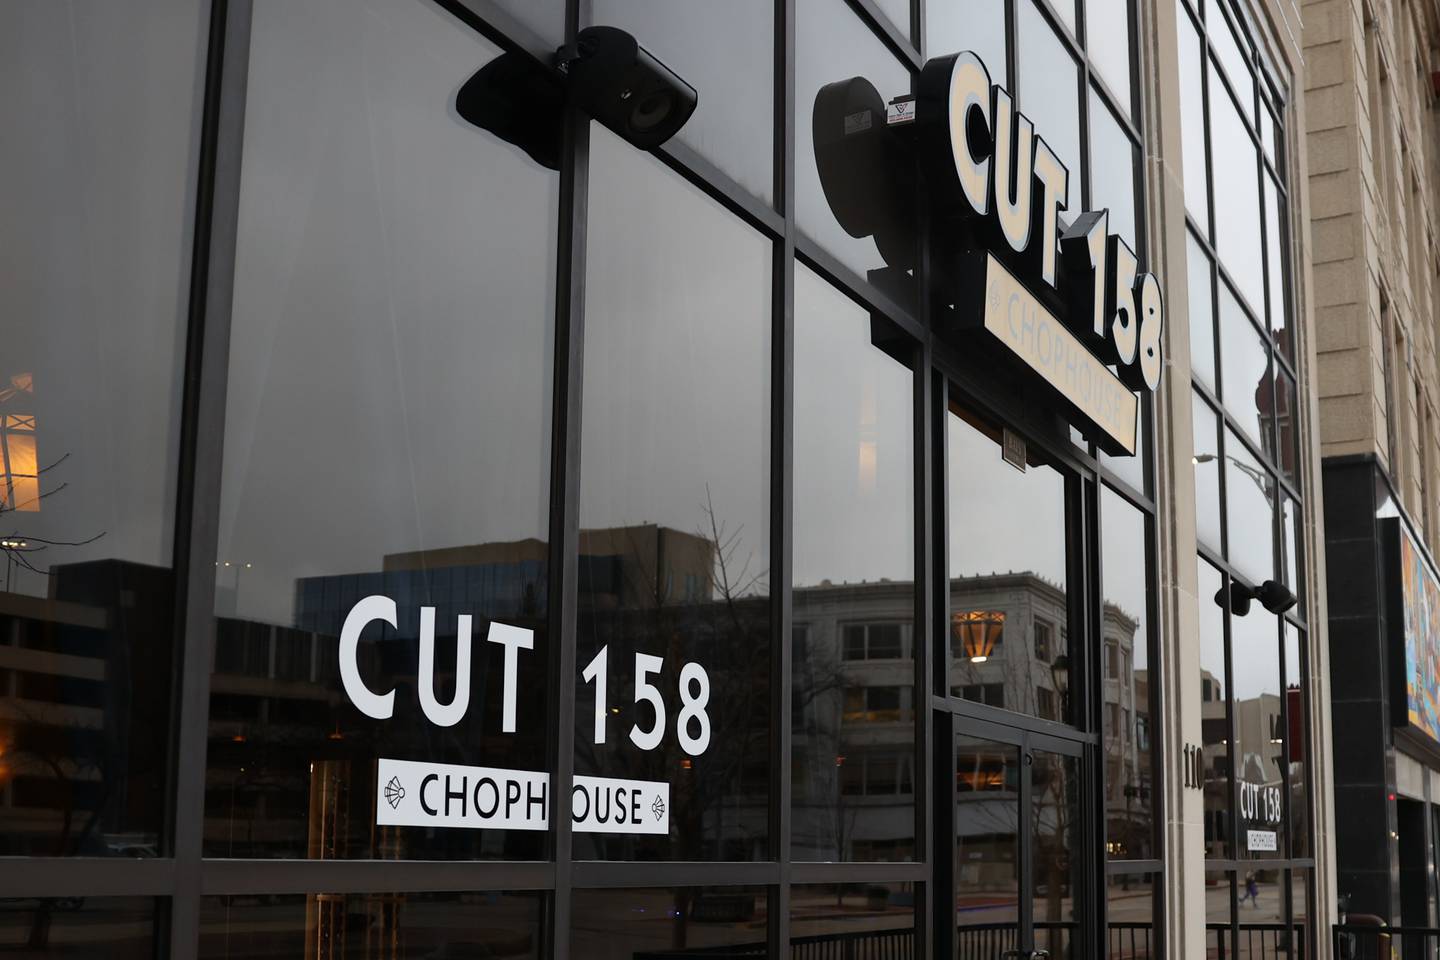 Cut 158 Chophouse is one of six Joliet area restaurants owned by Bill Dimitroulas, president of the Arkas Restaurant Group.